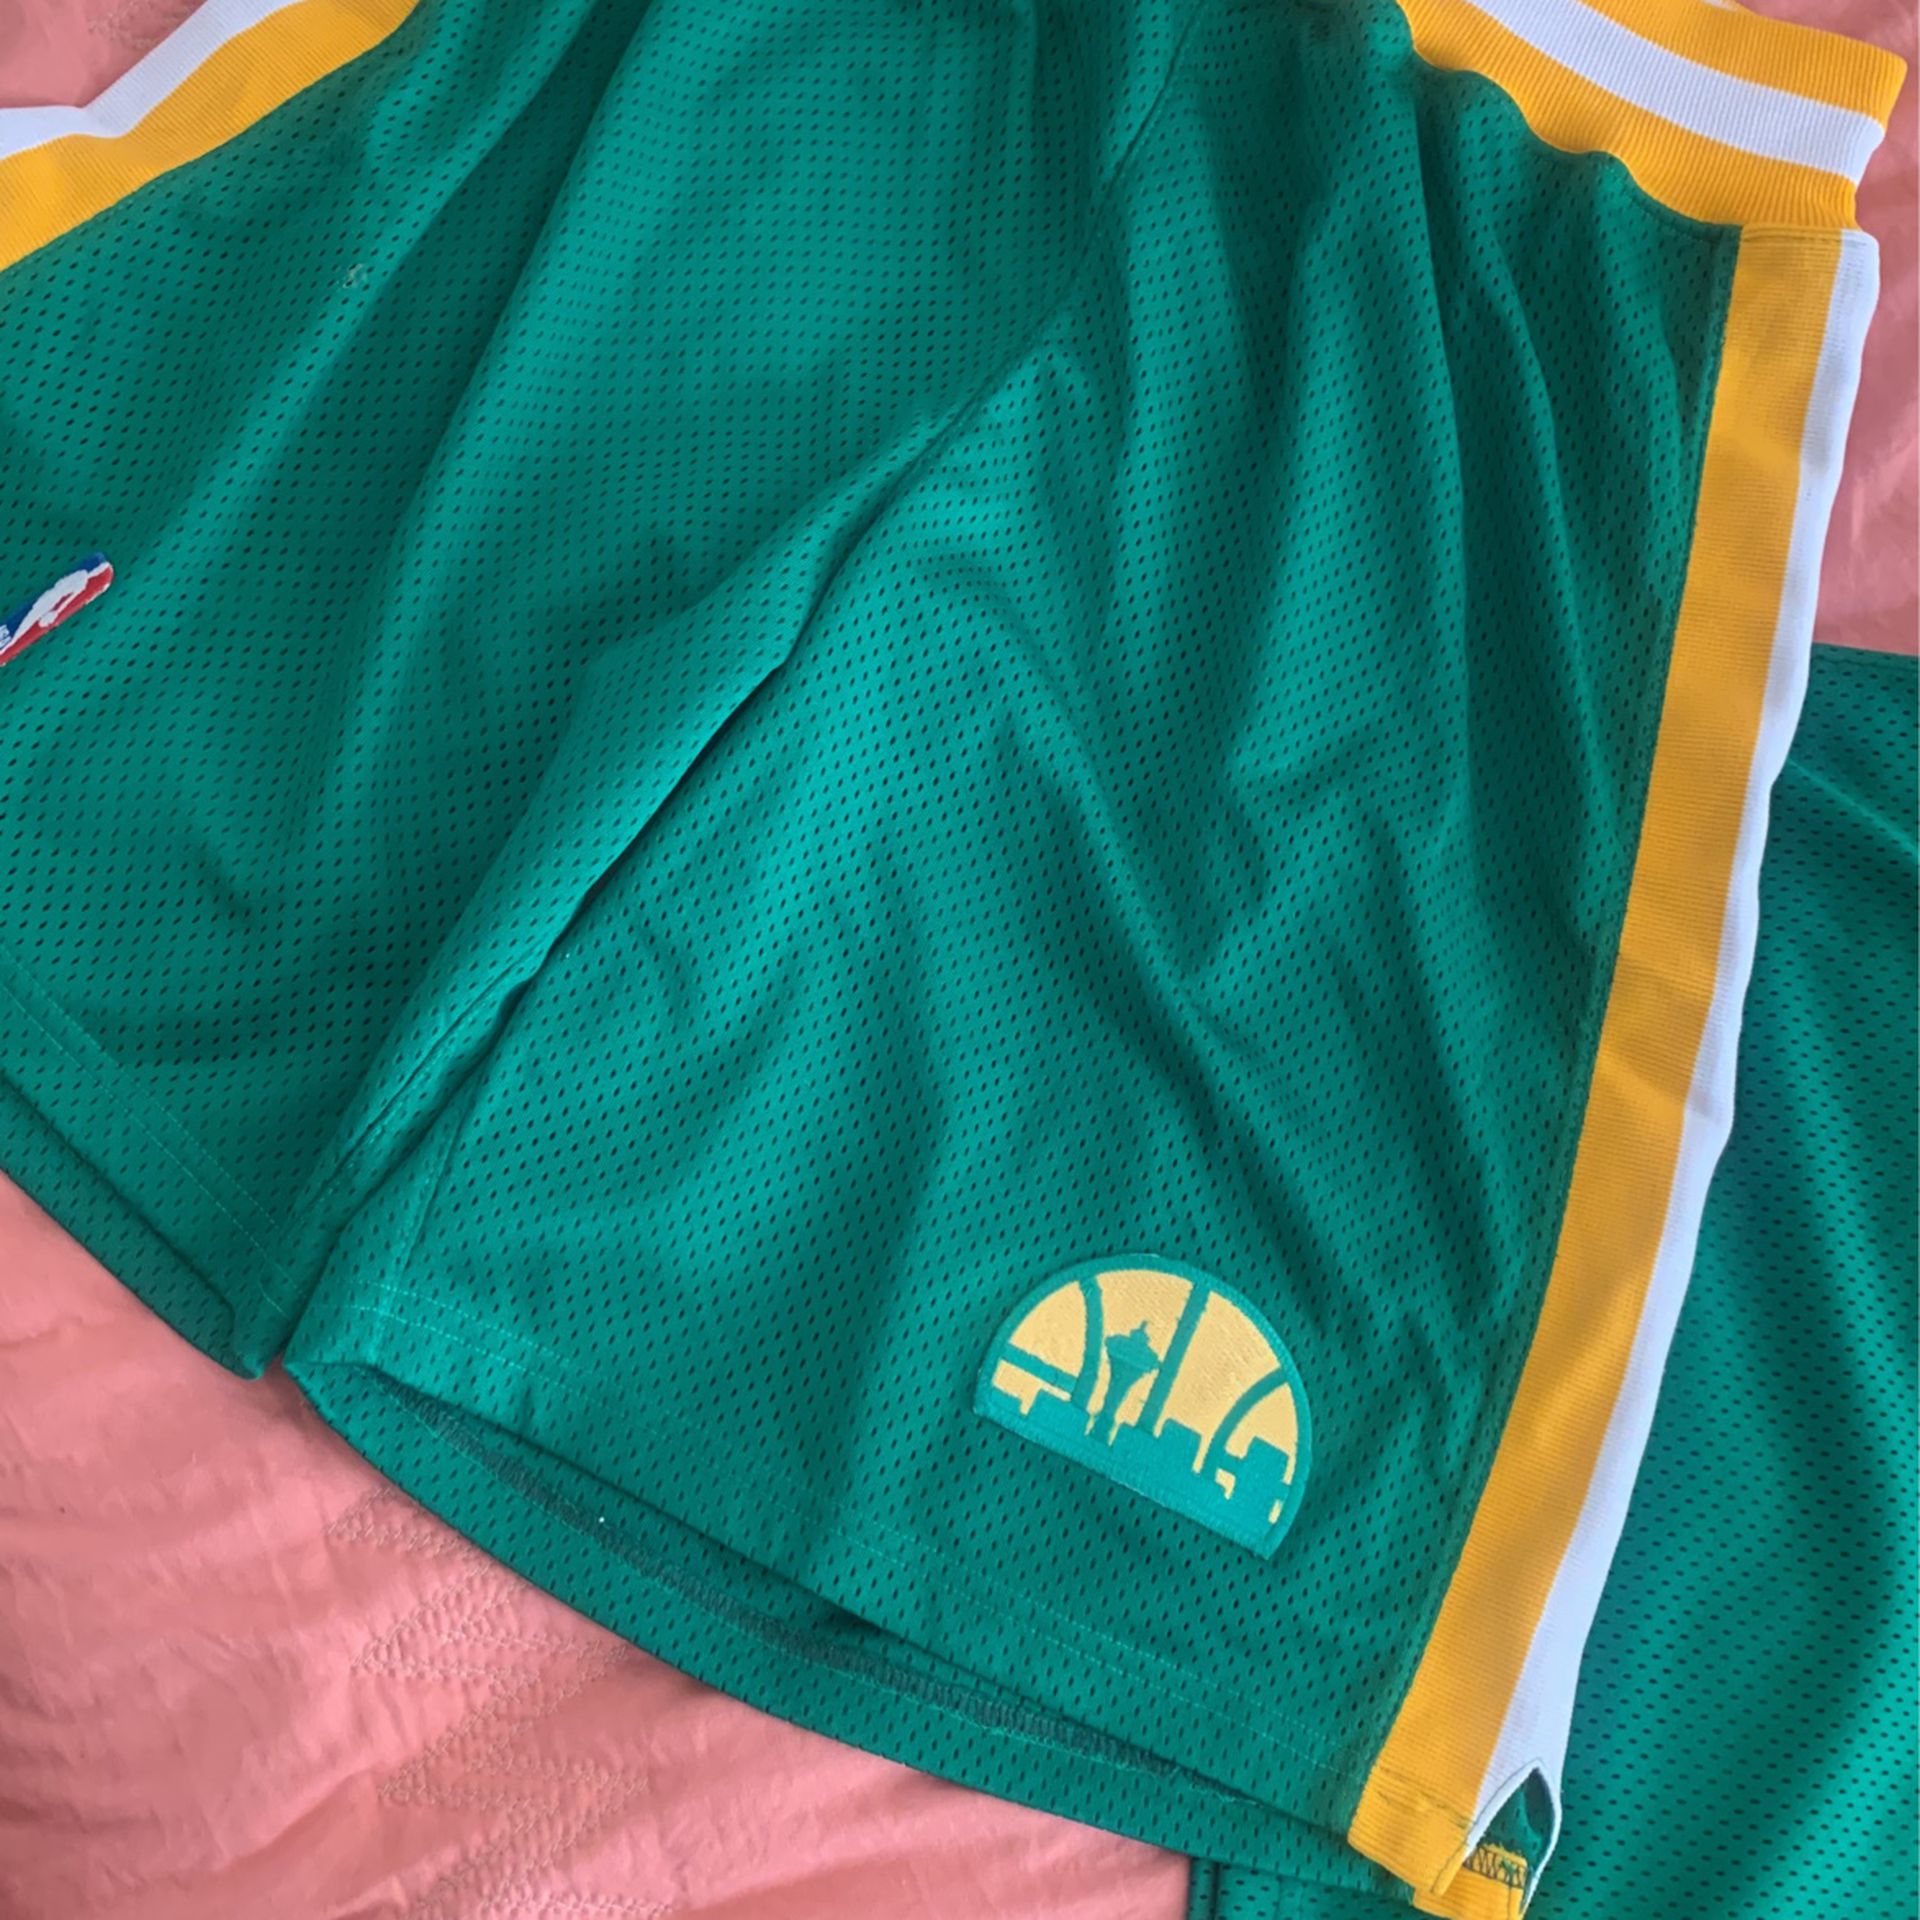 THROWBACK KENDALL GILL SEATTLE SUPERSONICS #13 JERSEY WITH MATCHING SHORTS  for Sale in Palmdale, CA - OfferUp